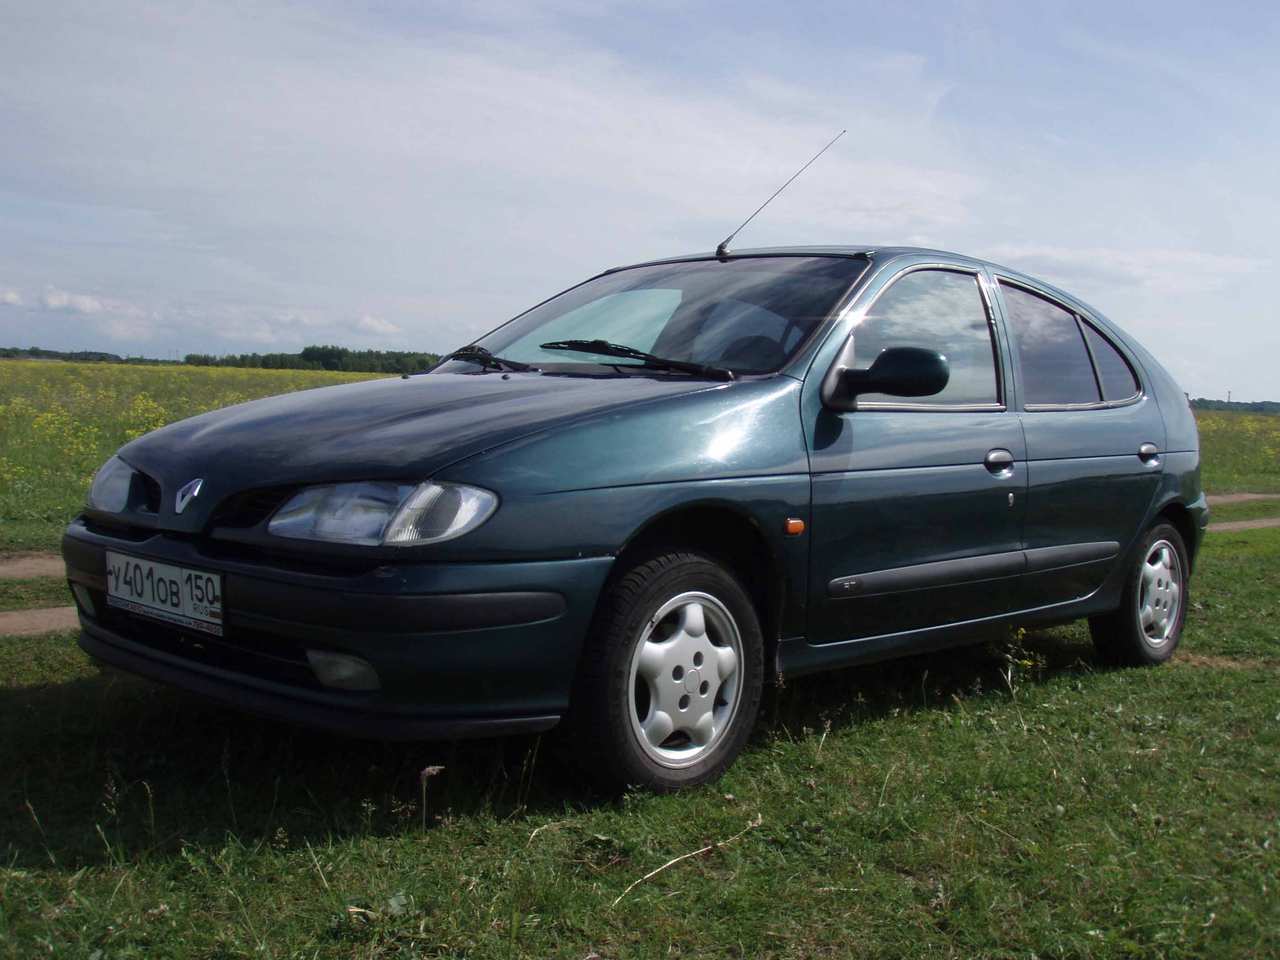 1996 Renault specs, size 1.6l., Fuel type Gasoline, Drive wheels FF, Transmission Gearbox Manual